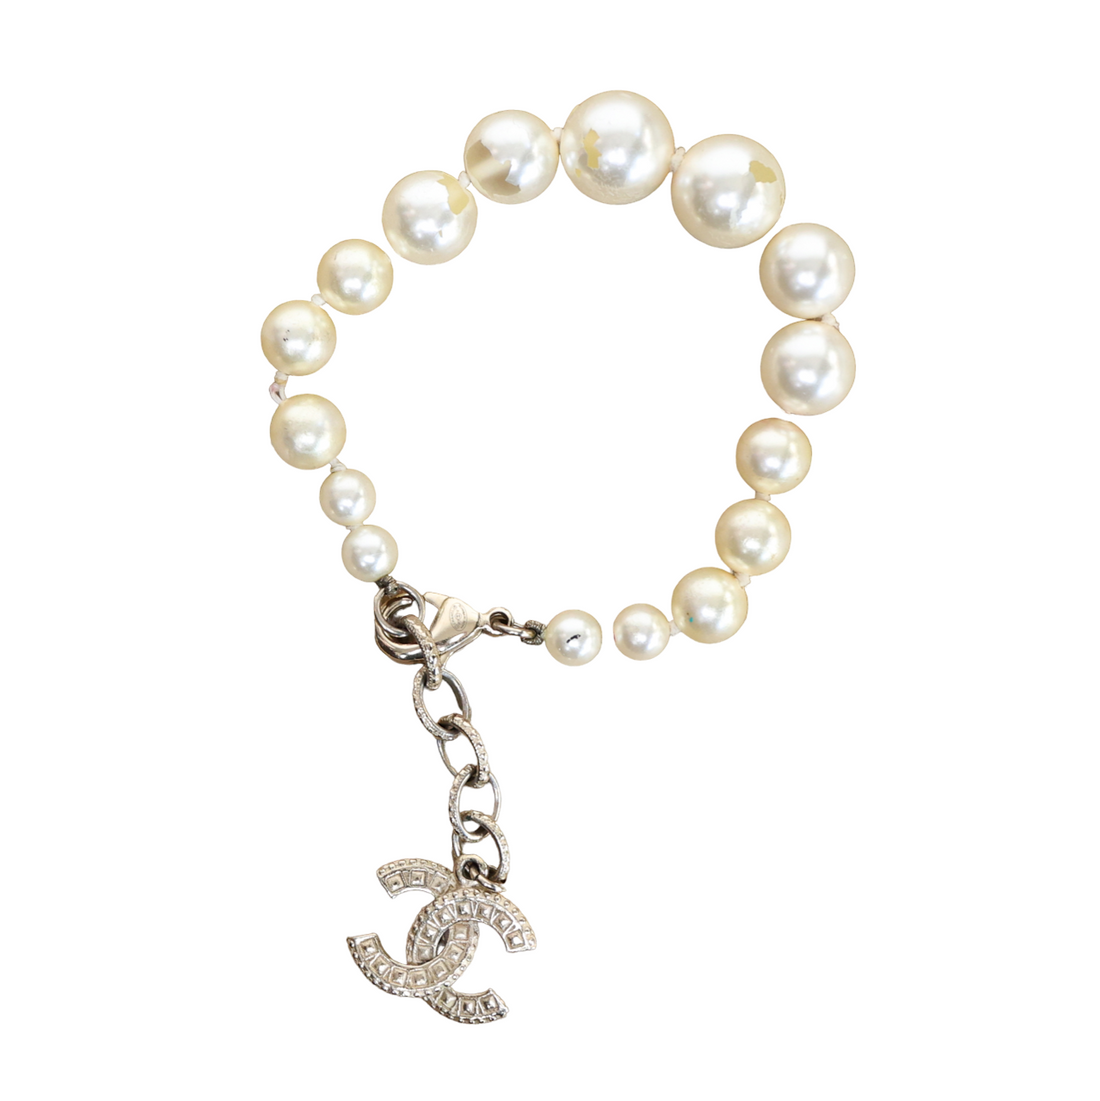 Chanel pearl bracelet with logo clasp